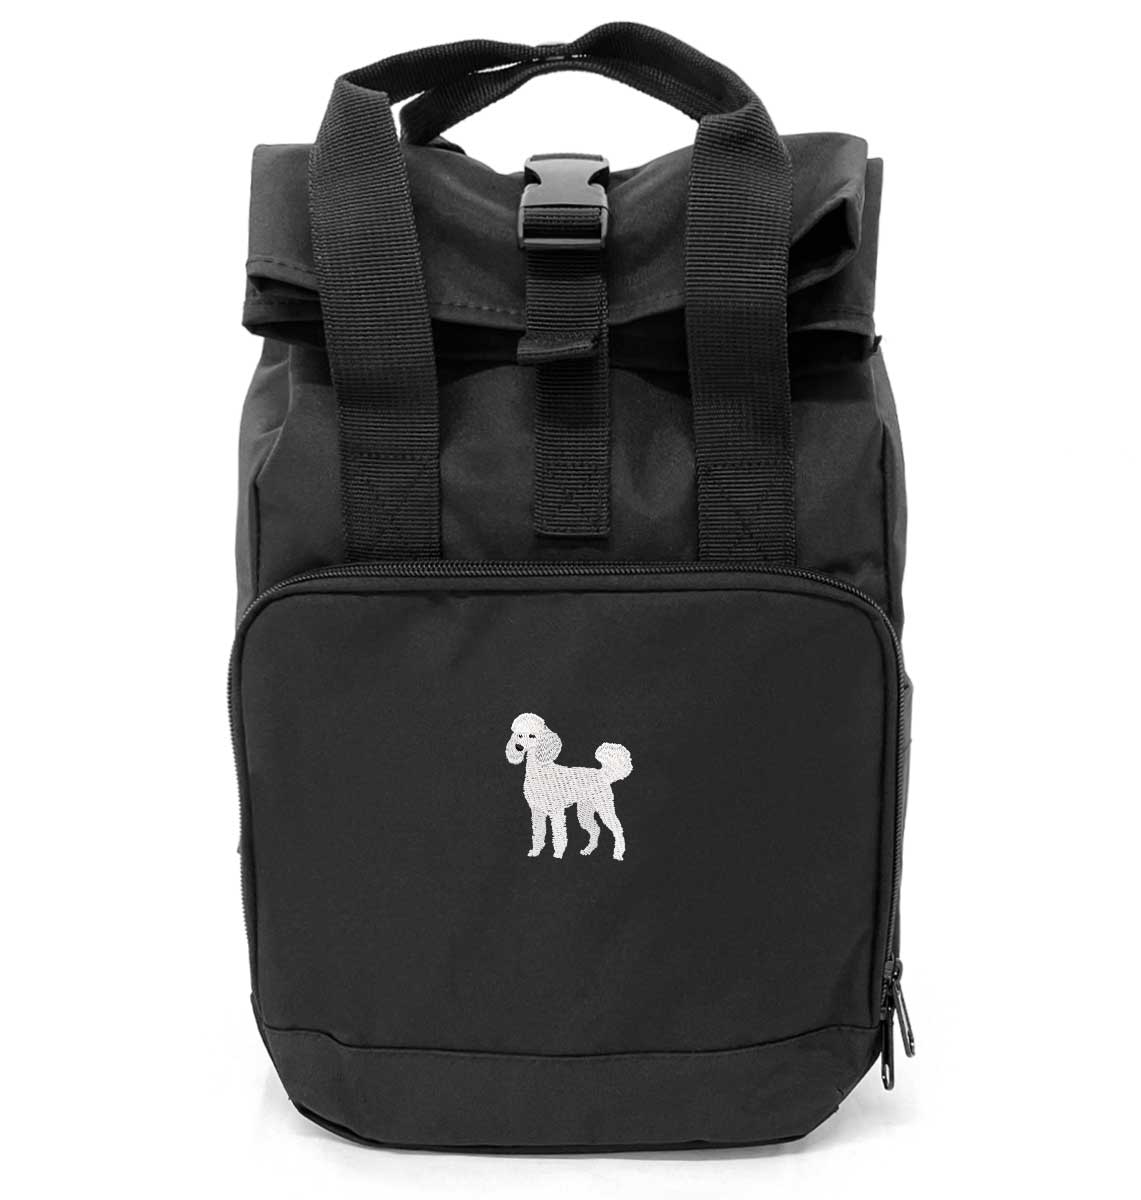 Poodle Mini Roll-top Recycled Backpack - Blue Panda